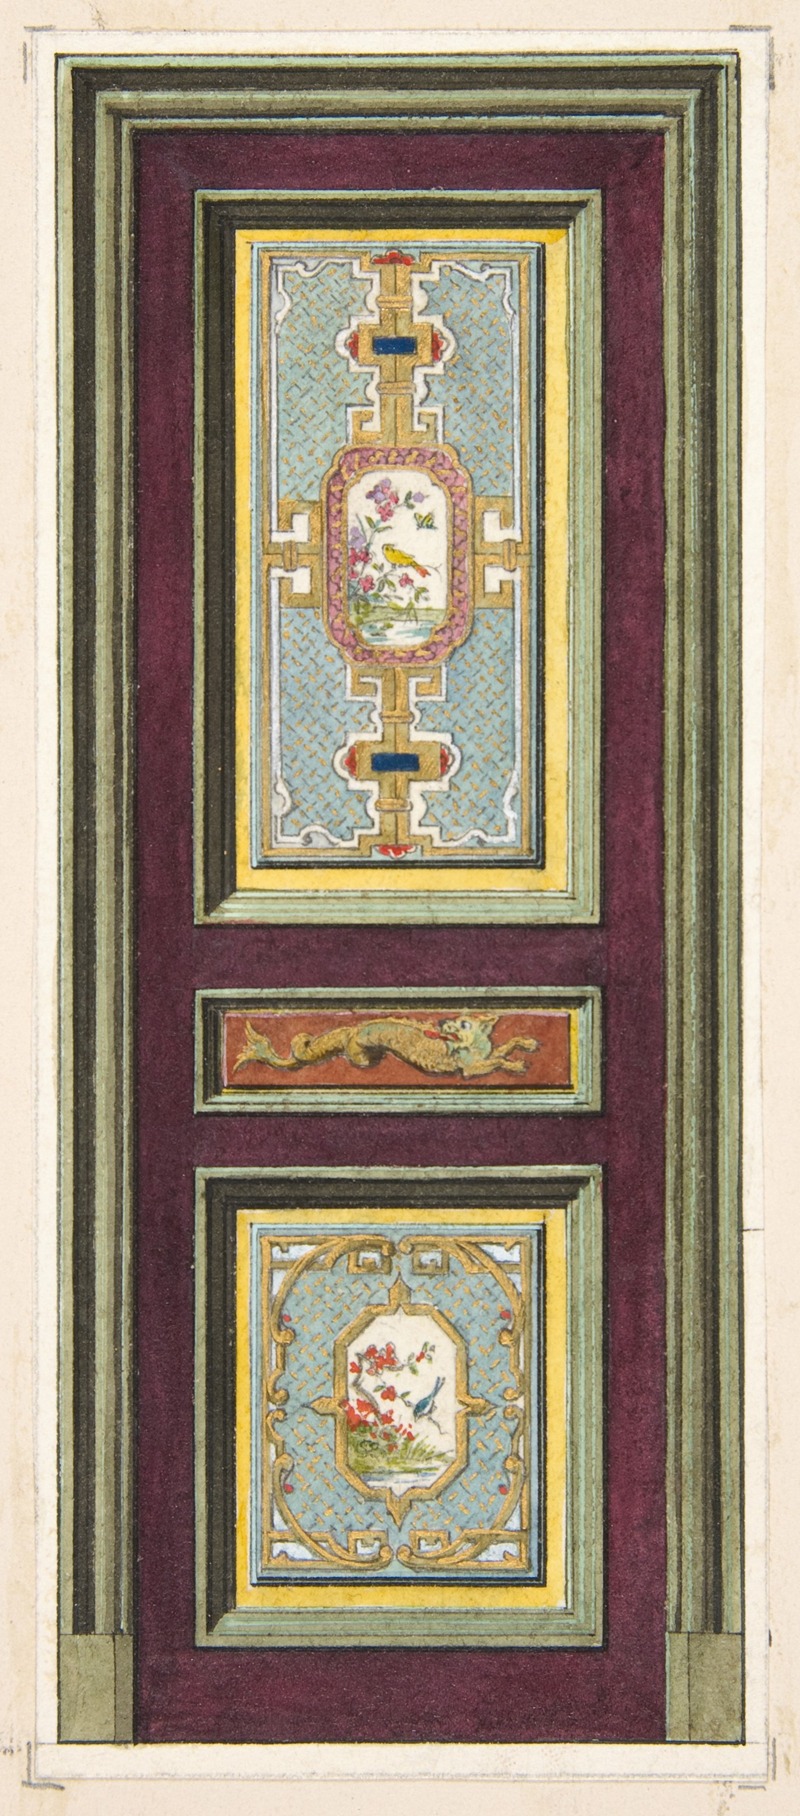 Jules-Edmond-Charles Lachaise - Design for the decoration of a door with Chinese motifs